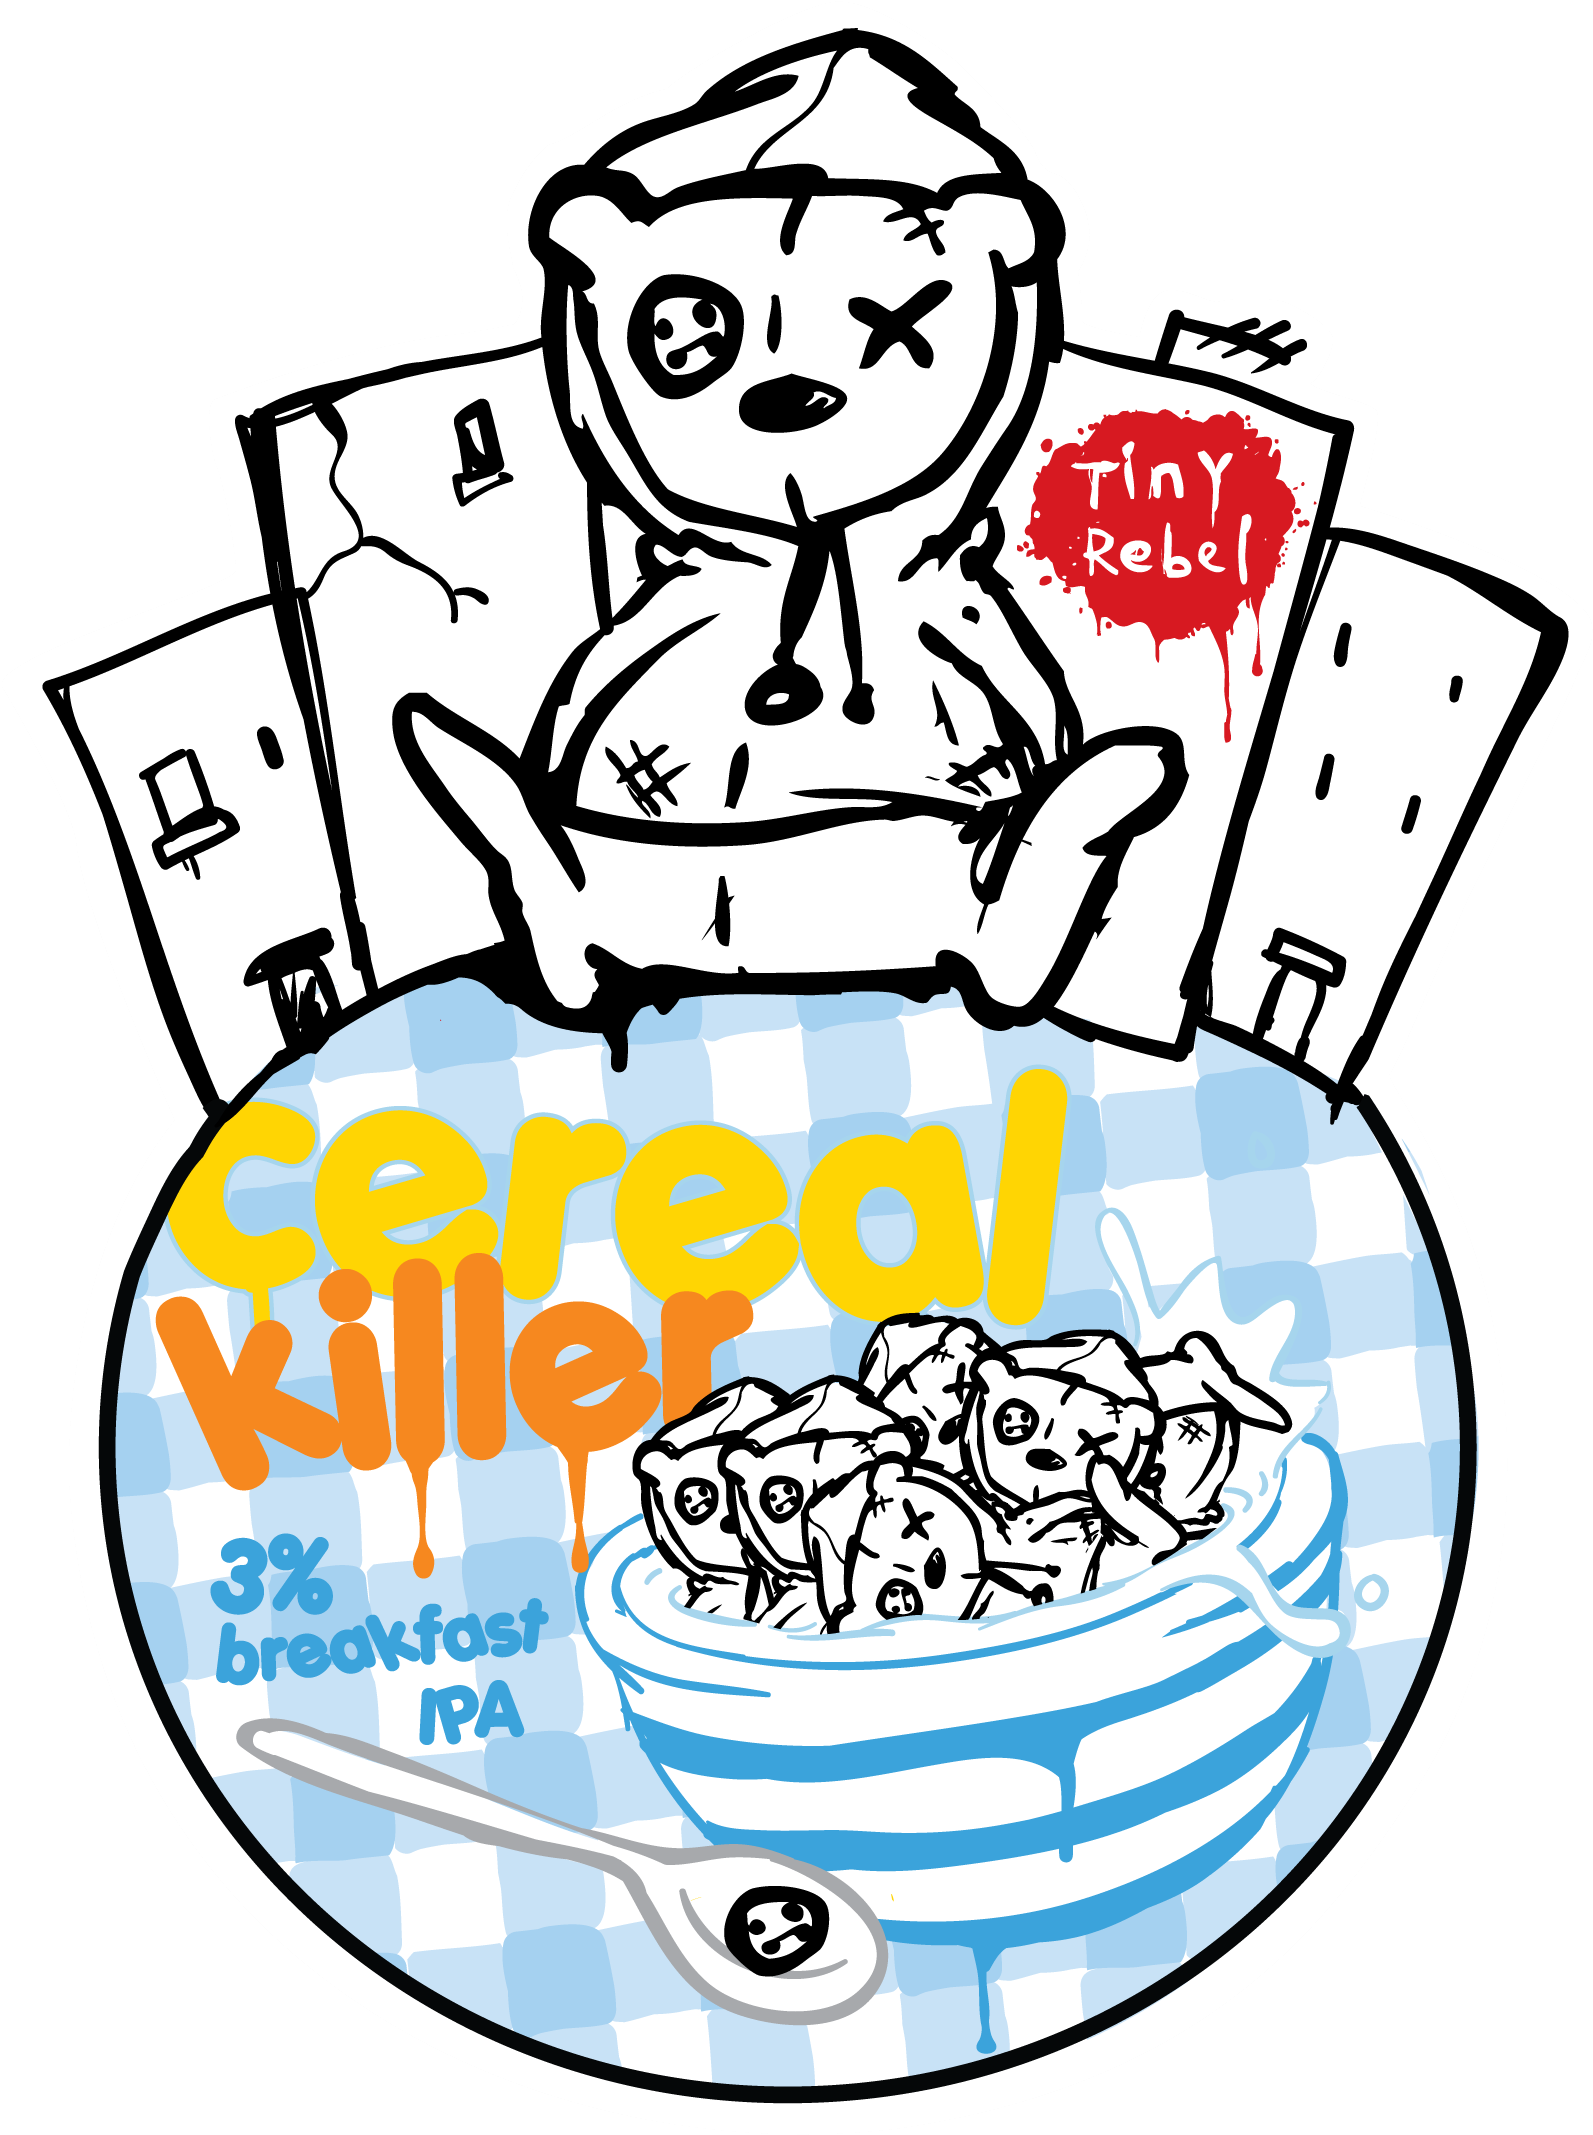 Tiny Rebel Brewery On Twitter - Tiny Rebel Cereal Killer (1942x2188)